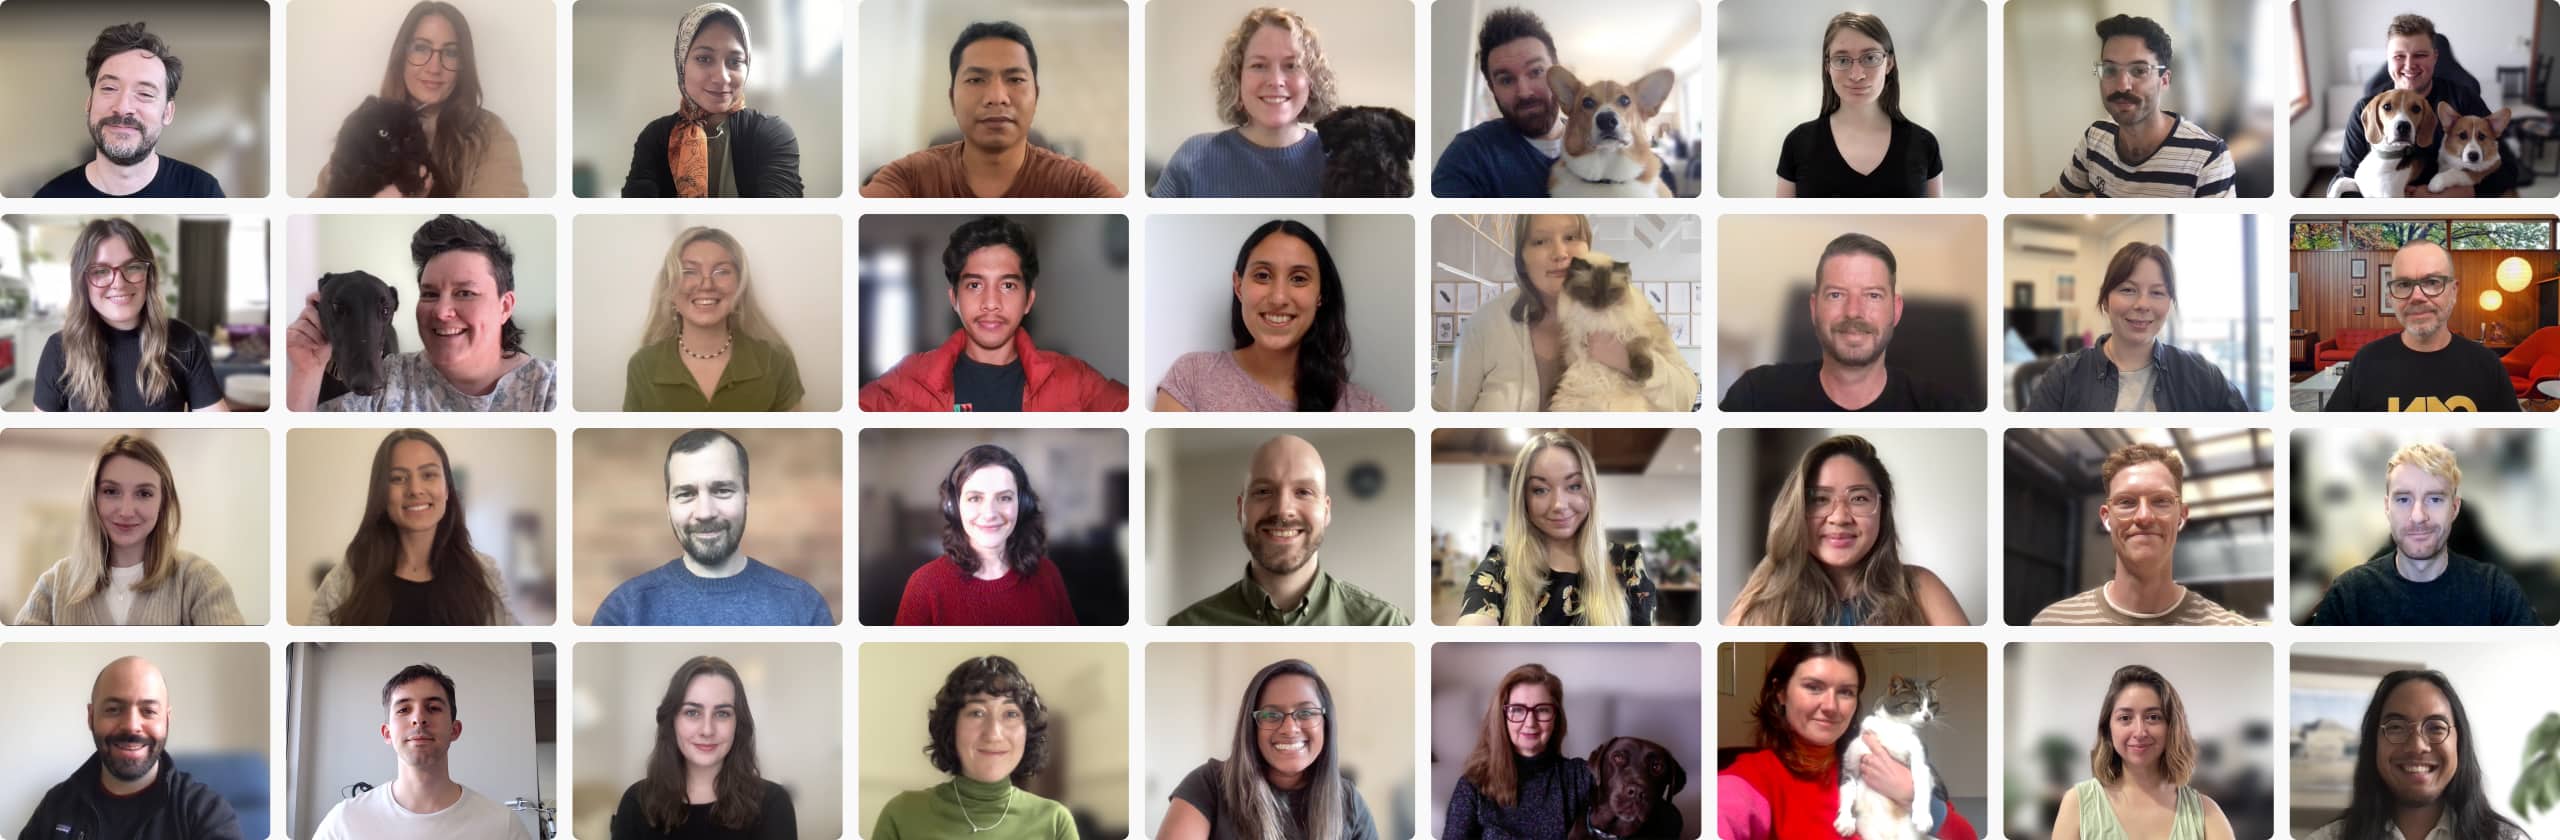 Collage of Ethical Jobs team members